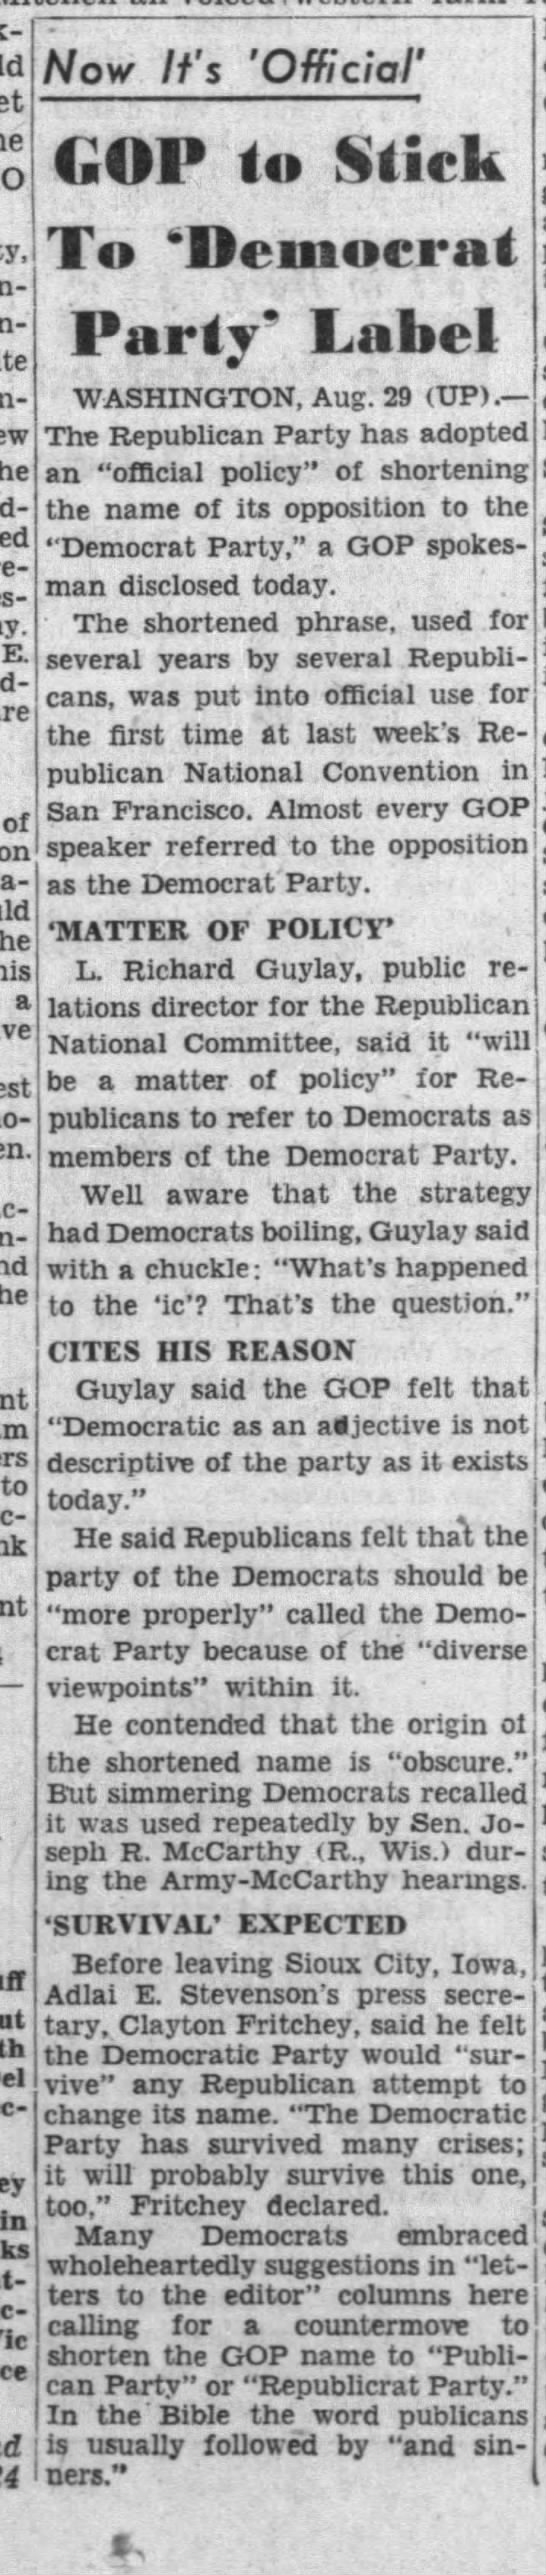 GOP "official policy" of calling it Democrat Party, 1956 - 